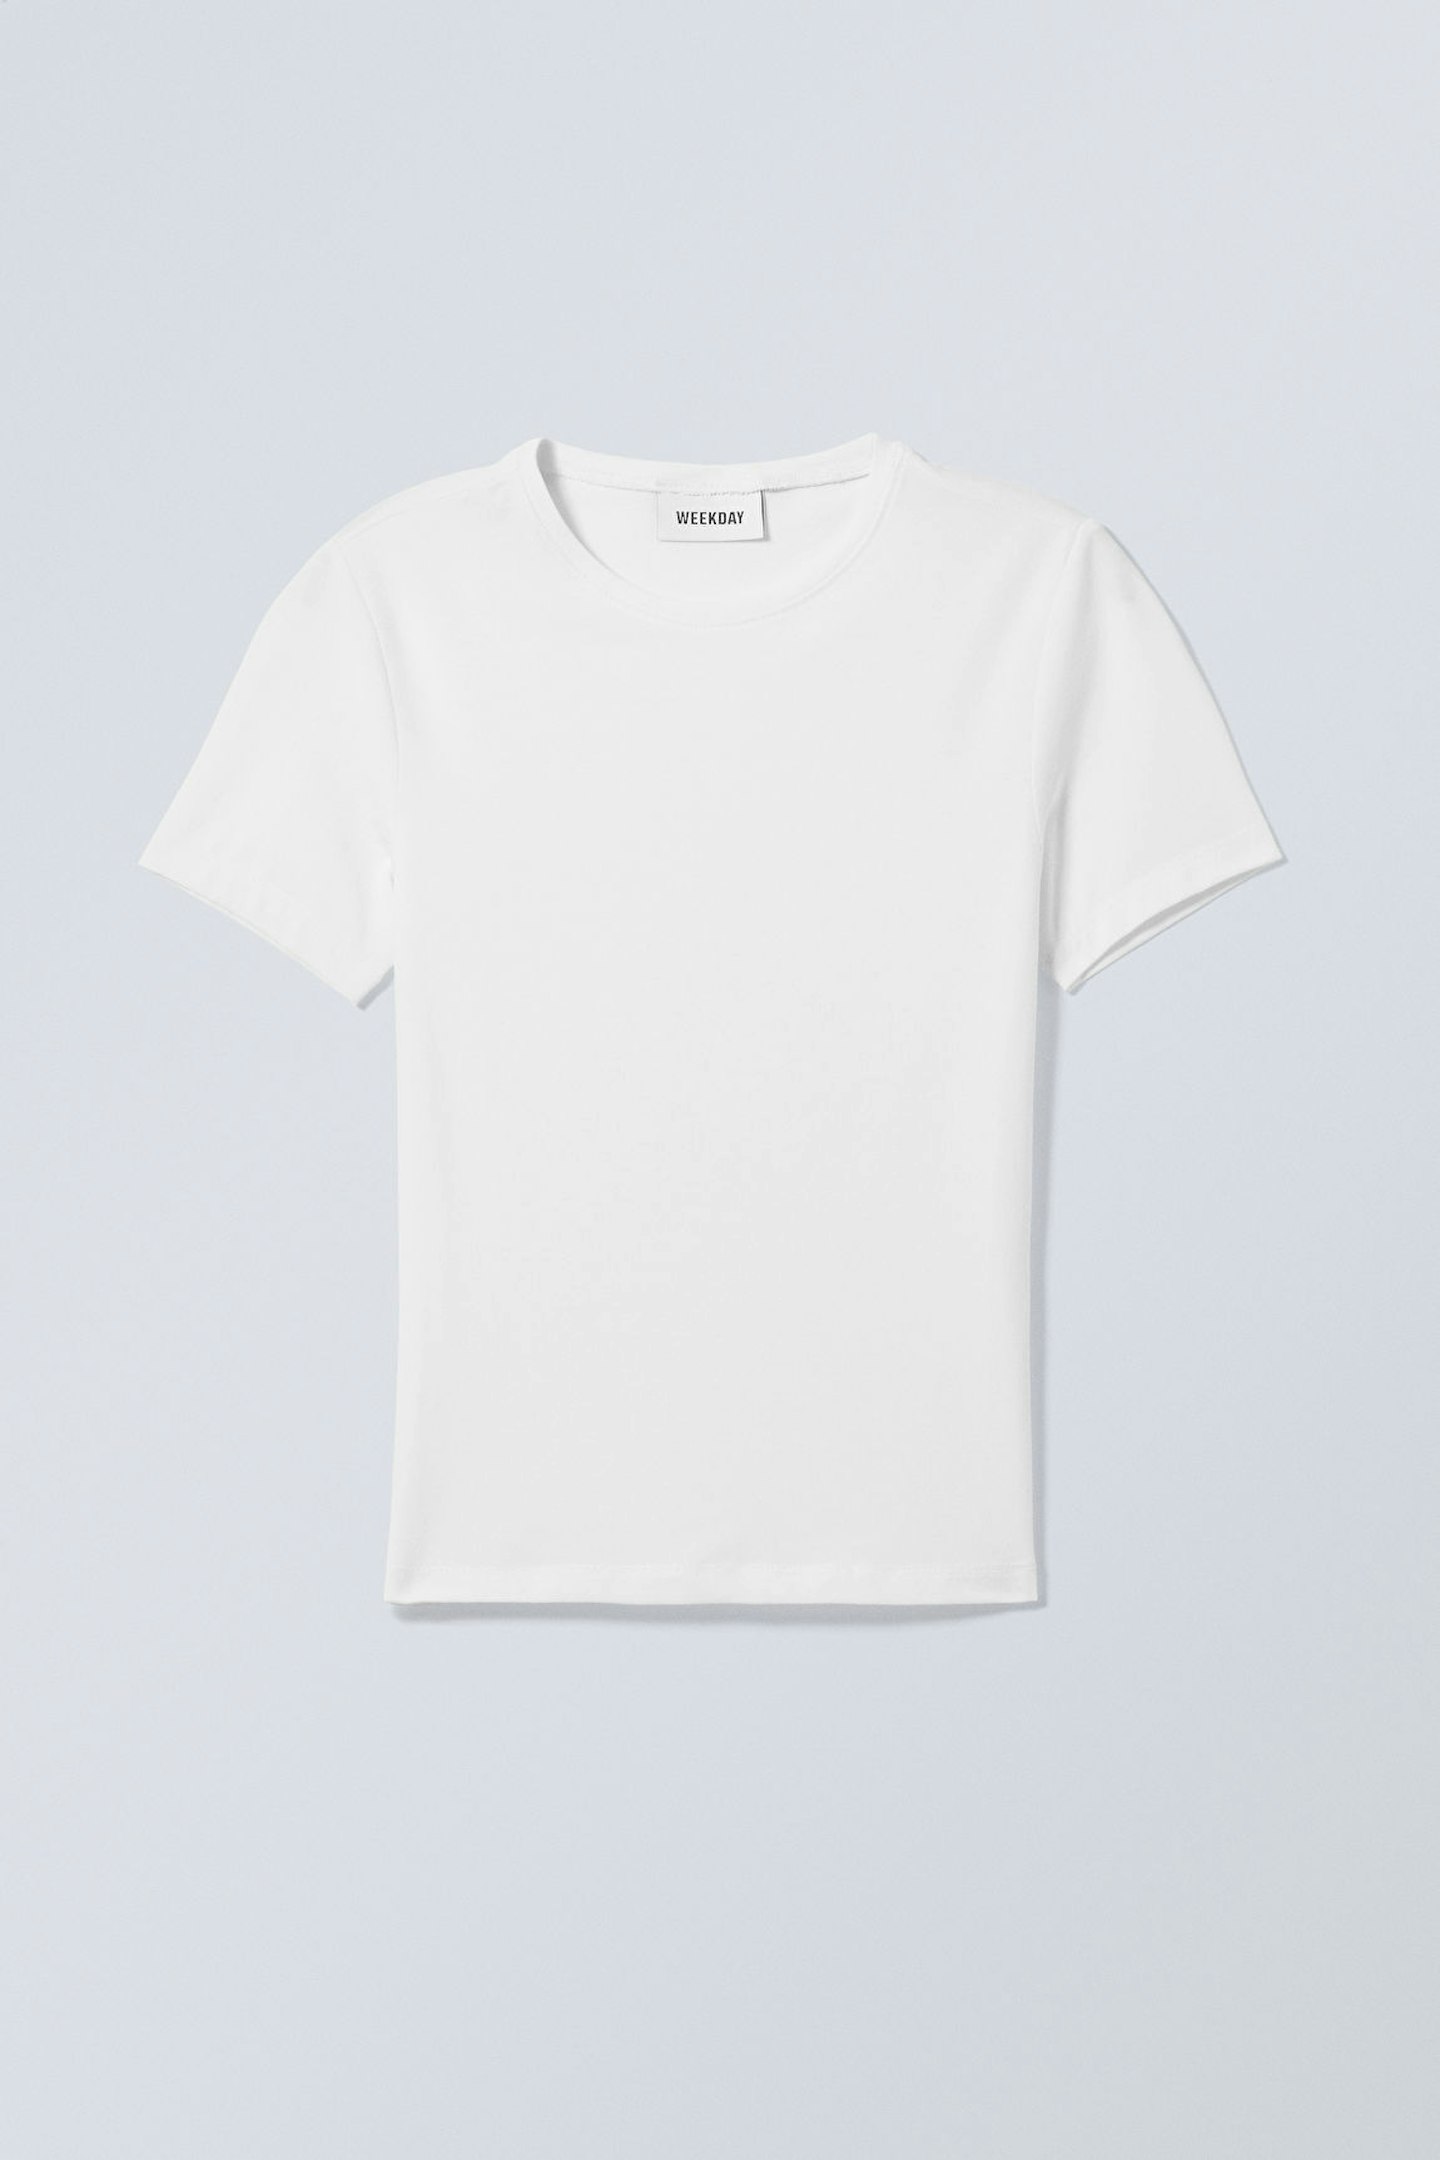 Weekday, Slim Fitted T-shirt